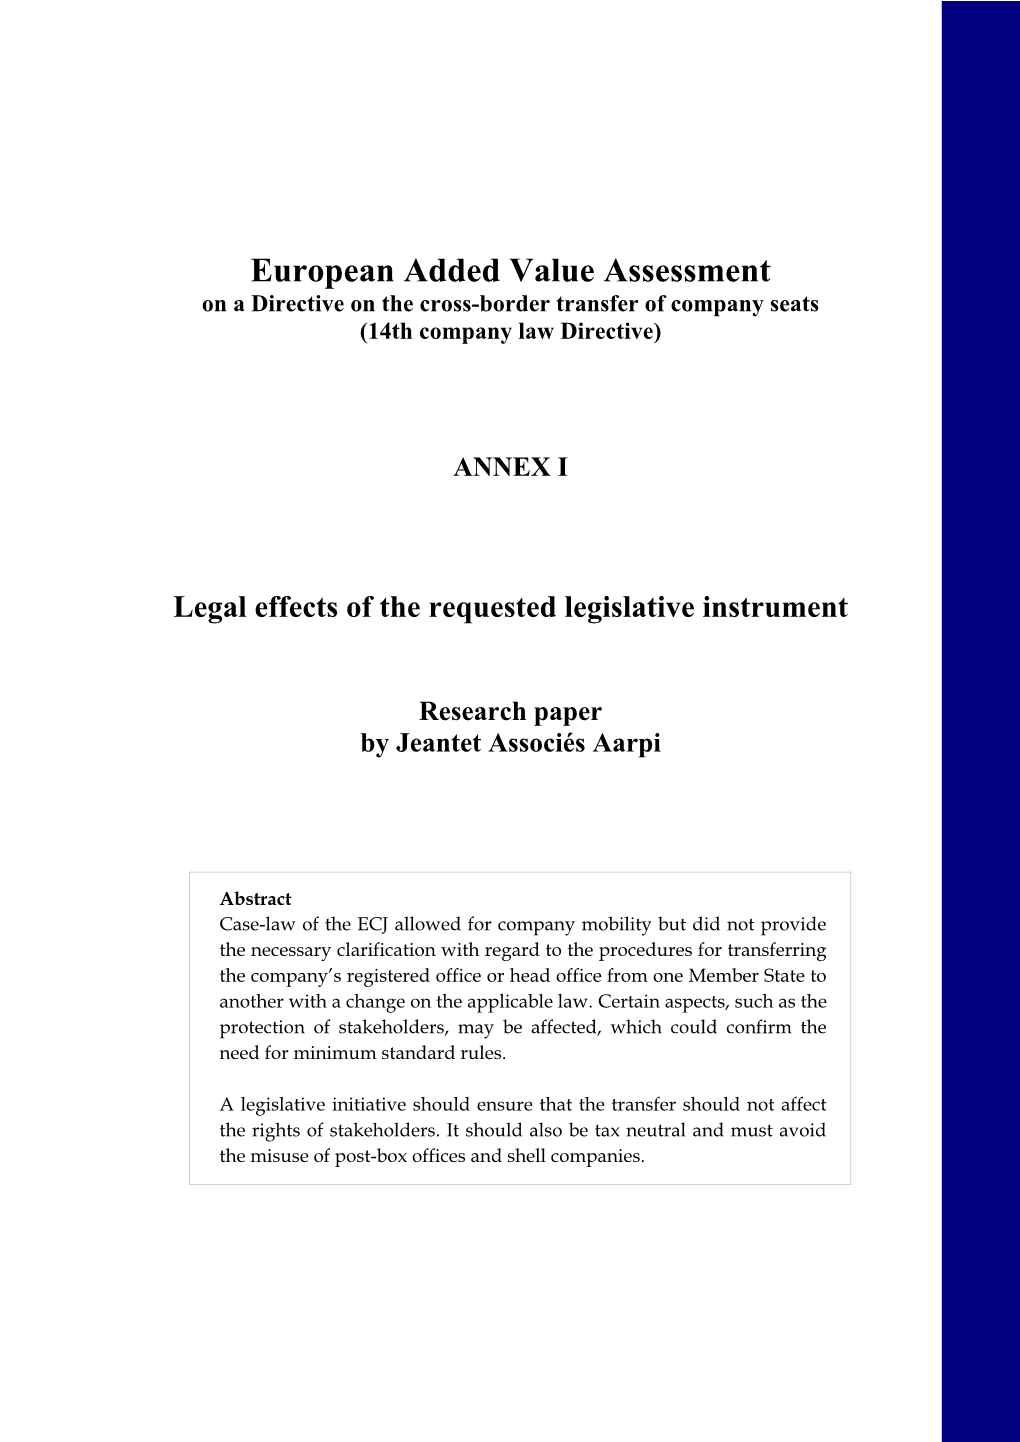 European Added Value Assessment on a Directive on the Cross-Border Transfer of Company Seats (14Th Company Law Directive)